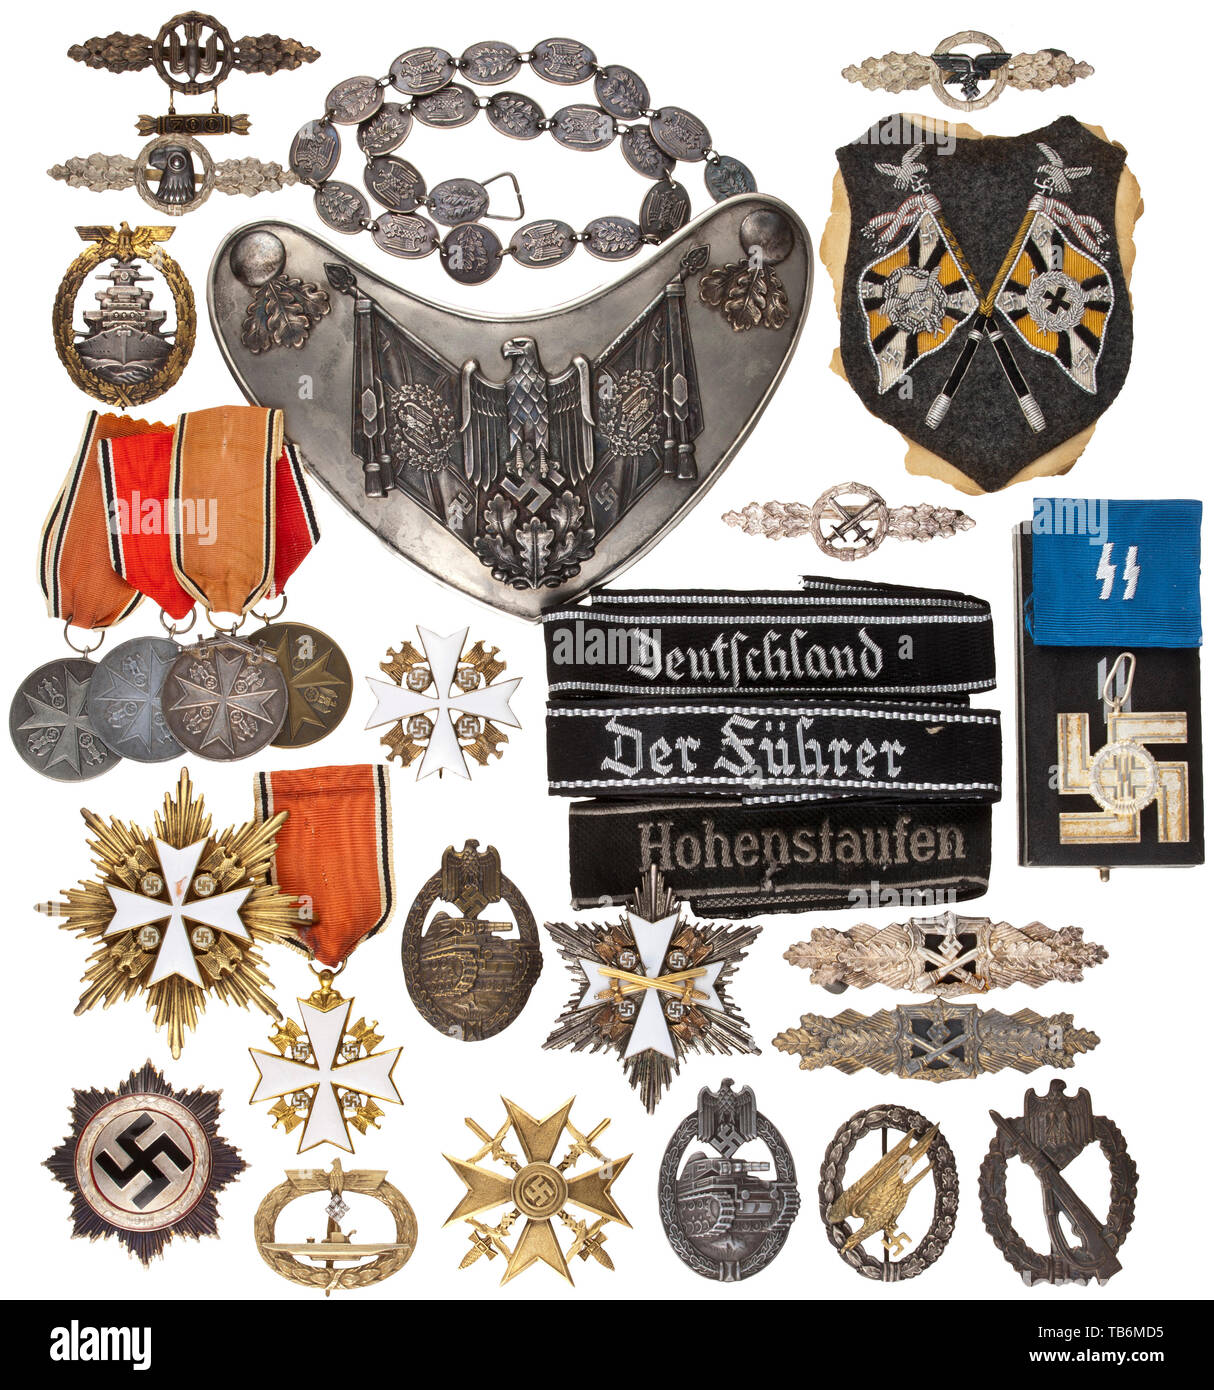 A group of 29 high-quality collector's reproductions, Including a cased U-Boat War Badge with brilliants, a cased Spanish Cross in Gold, various grades of the Order of the German Eagle, the High Seas Fleet War Badge, Parachutist Badge, Tank Battle Badge, Close Combat and Squadron clasps, cased German Cross in Silver, cased SS Long Service Award, badges and gorgets for flag bearers, several cuff titles etc. medal, decoration, medals, decorations, badge of honour, badge of honor, badges of honour, badges of honor, object, objects, stills, clipping, clippings, cut out, cut-out, Editorial-Use-Only Stock Photo